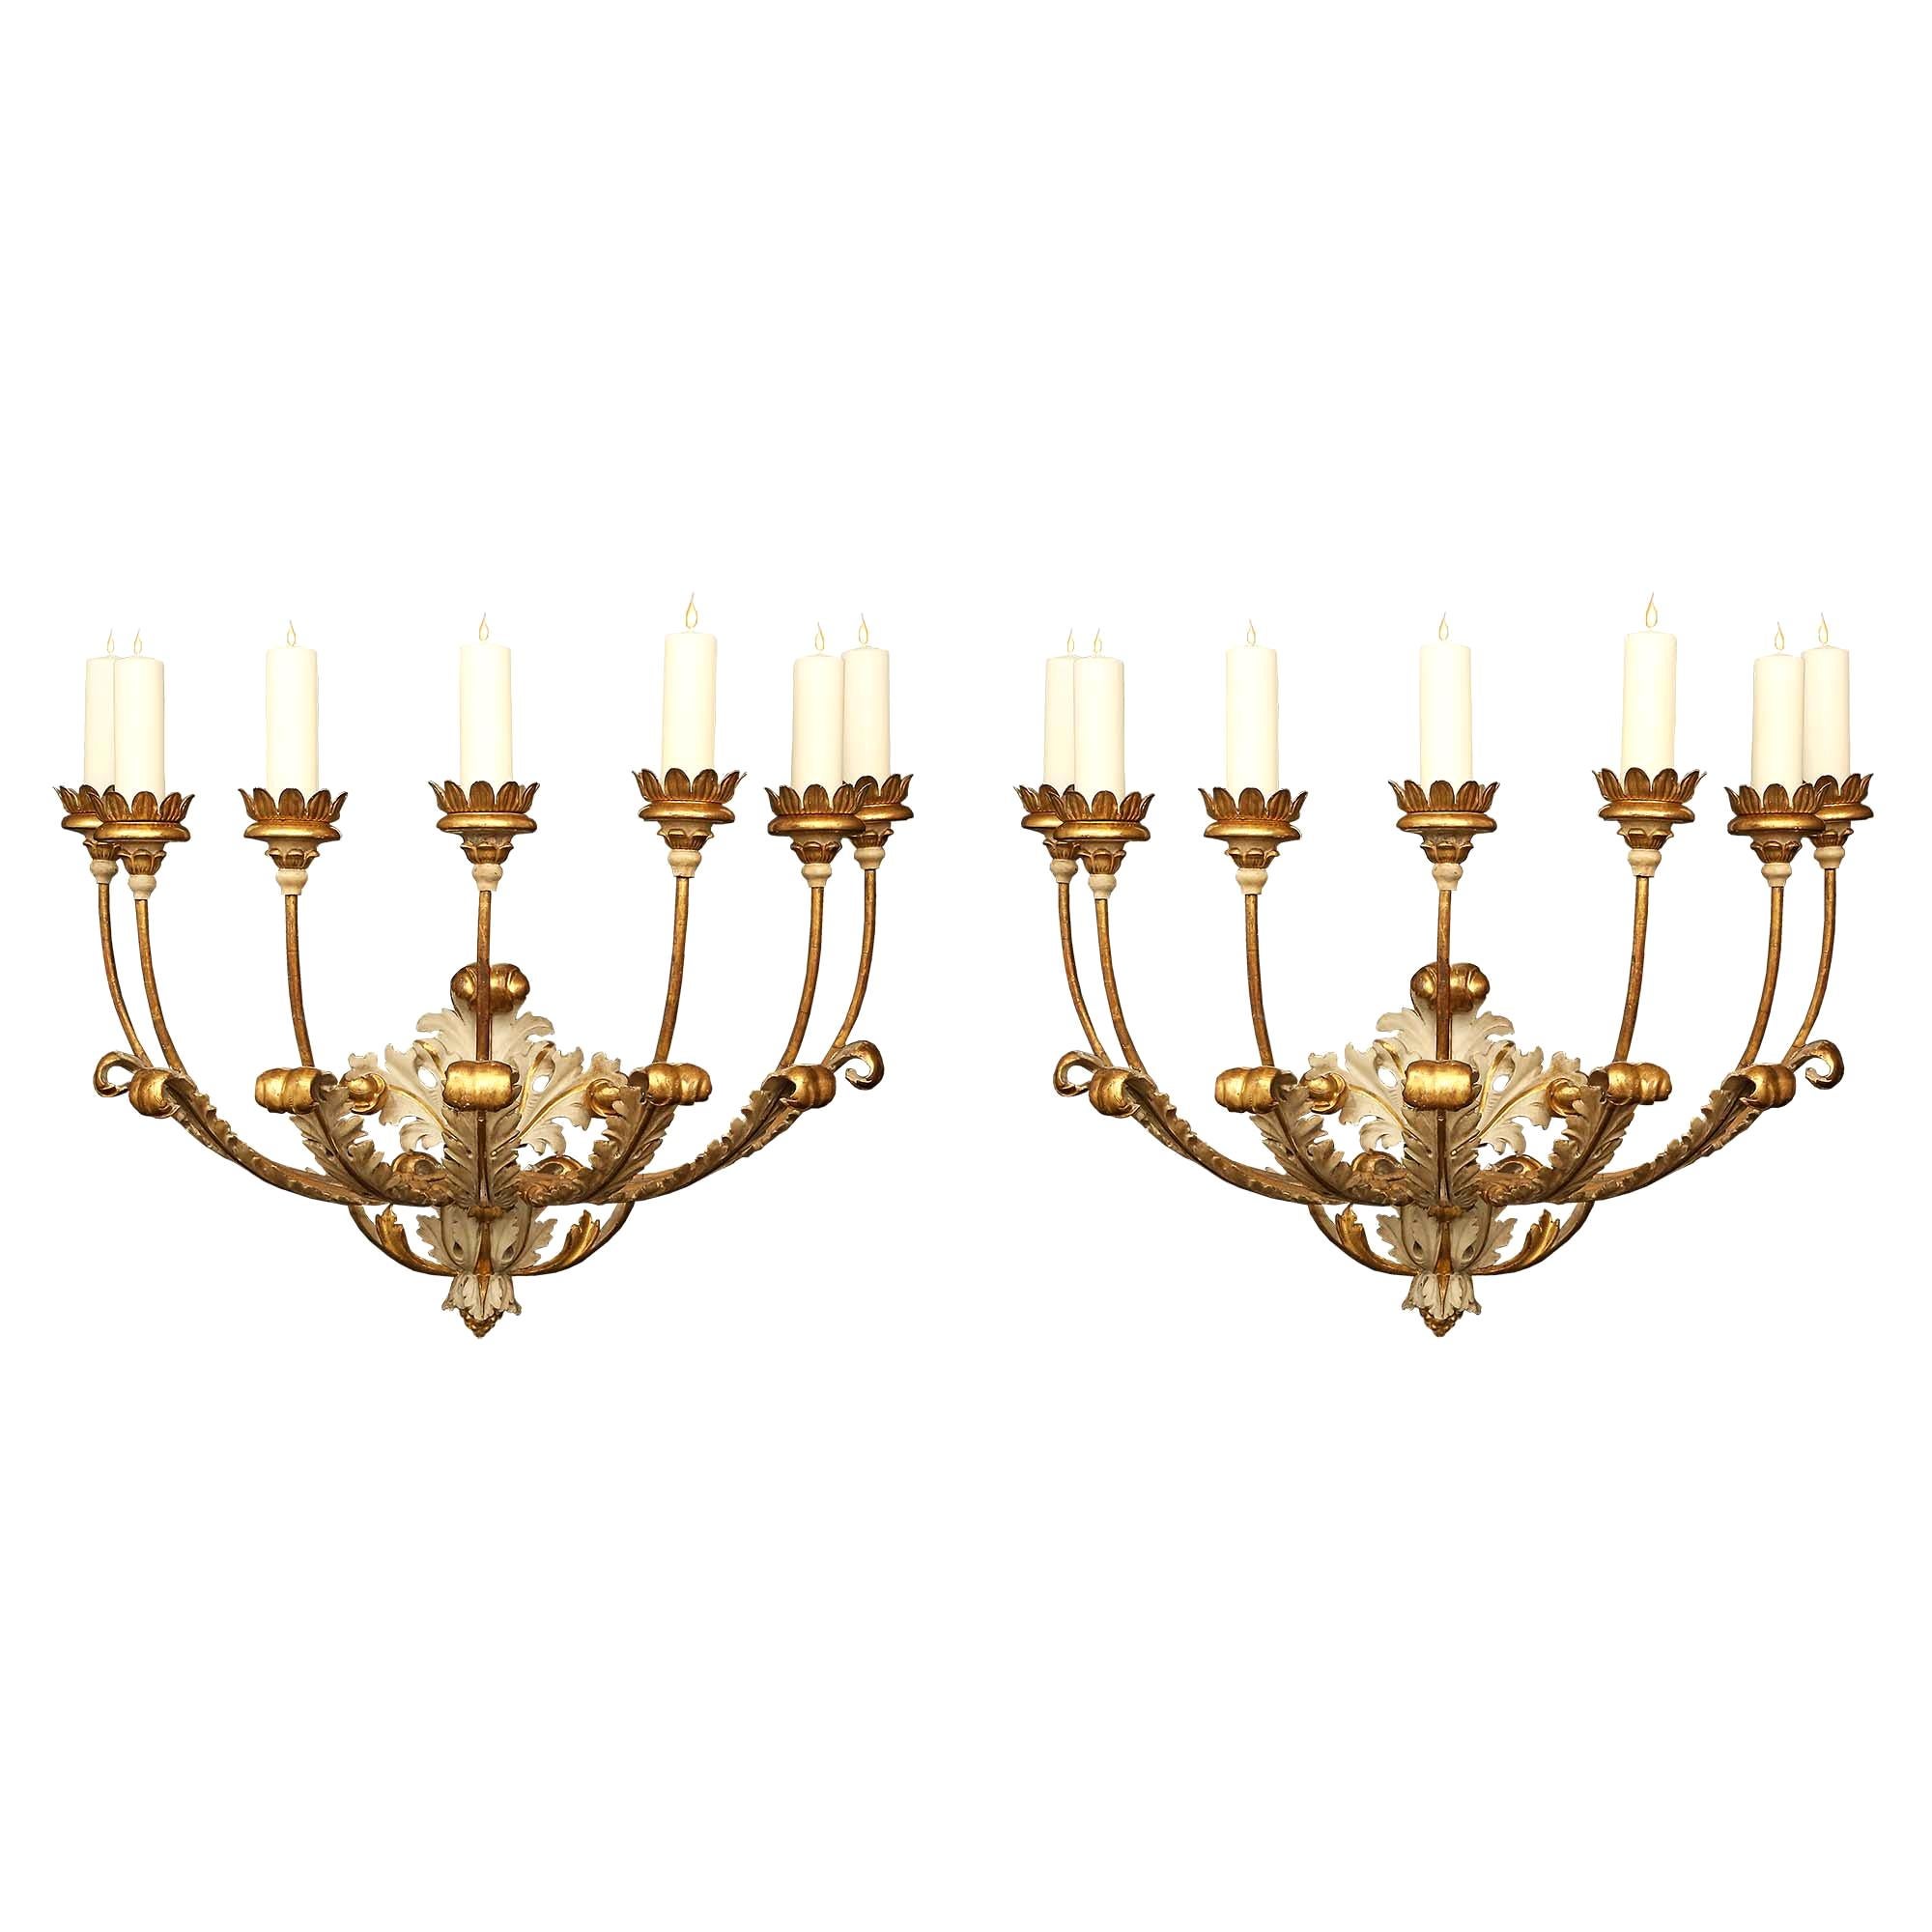 Pair of Italian 18th Century Giltwood and Patinated Seven Arm Sconces